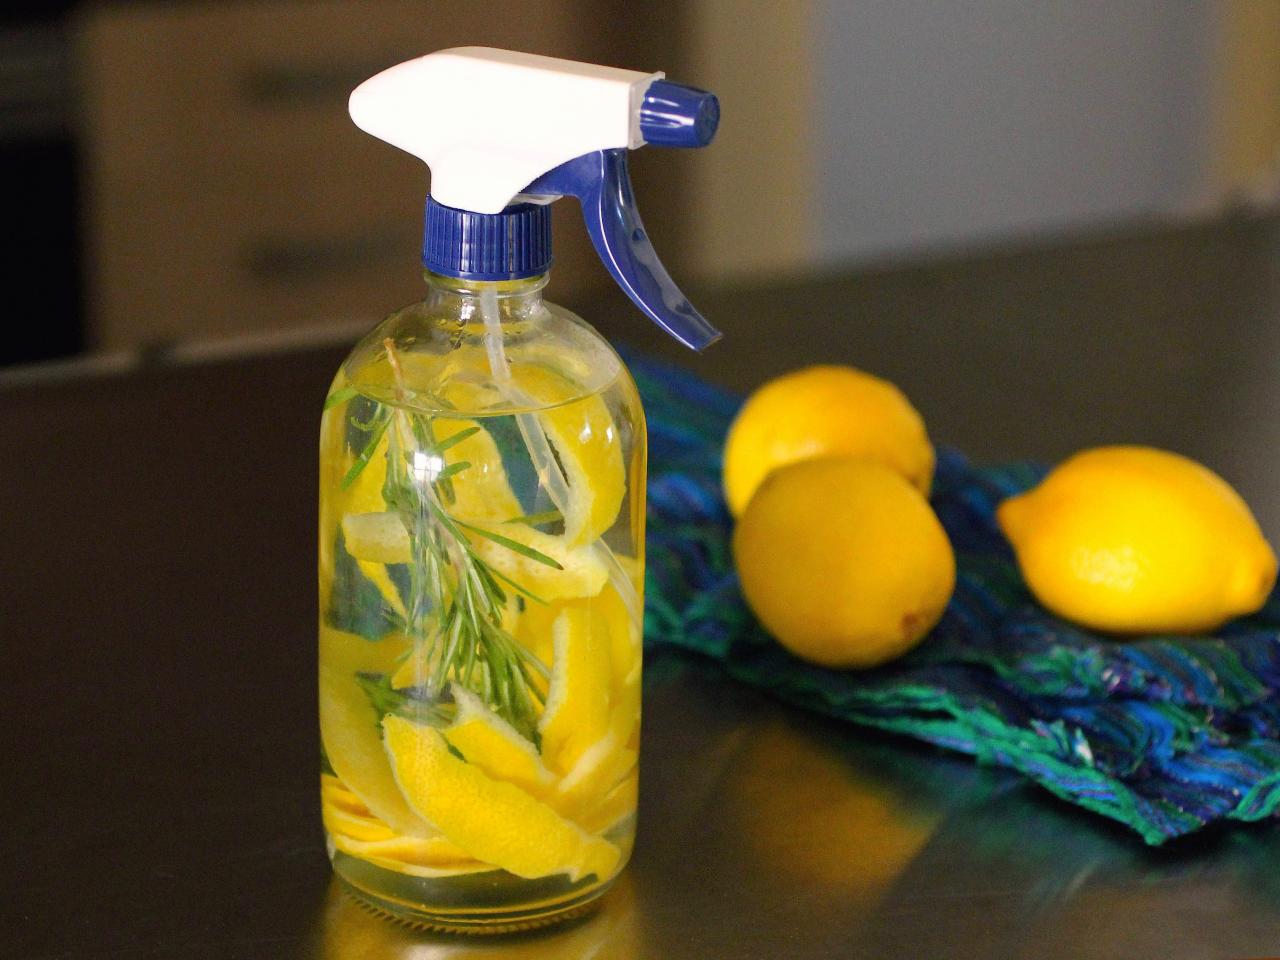 a spray bottle filled with natural cleaning solution, surrounded by fresh lemons, lavender, or other natural ingredients